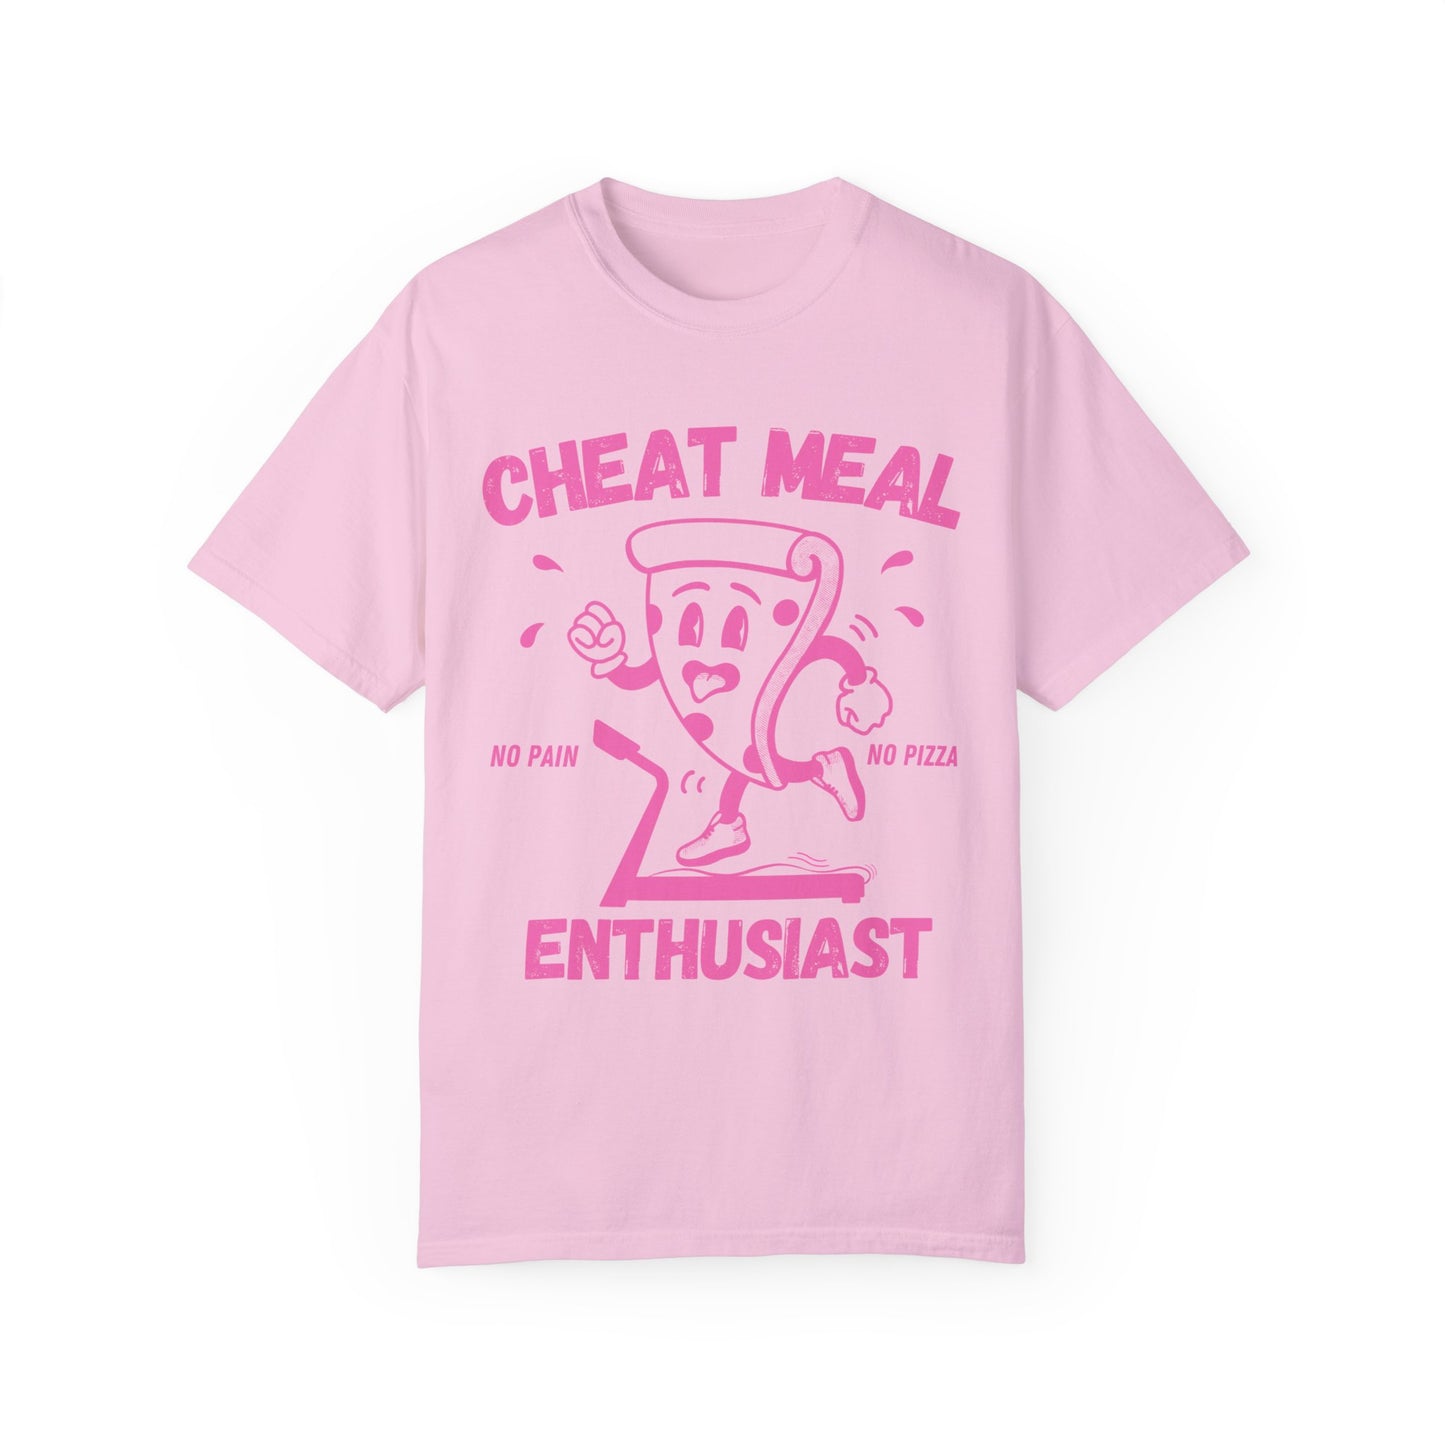 Cheat Meal Enthusiast Gym Tee